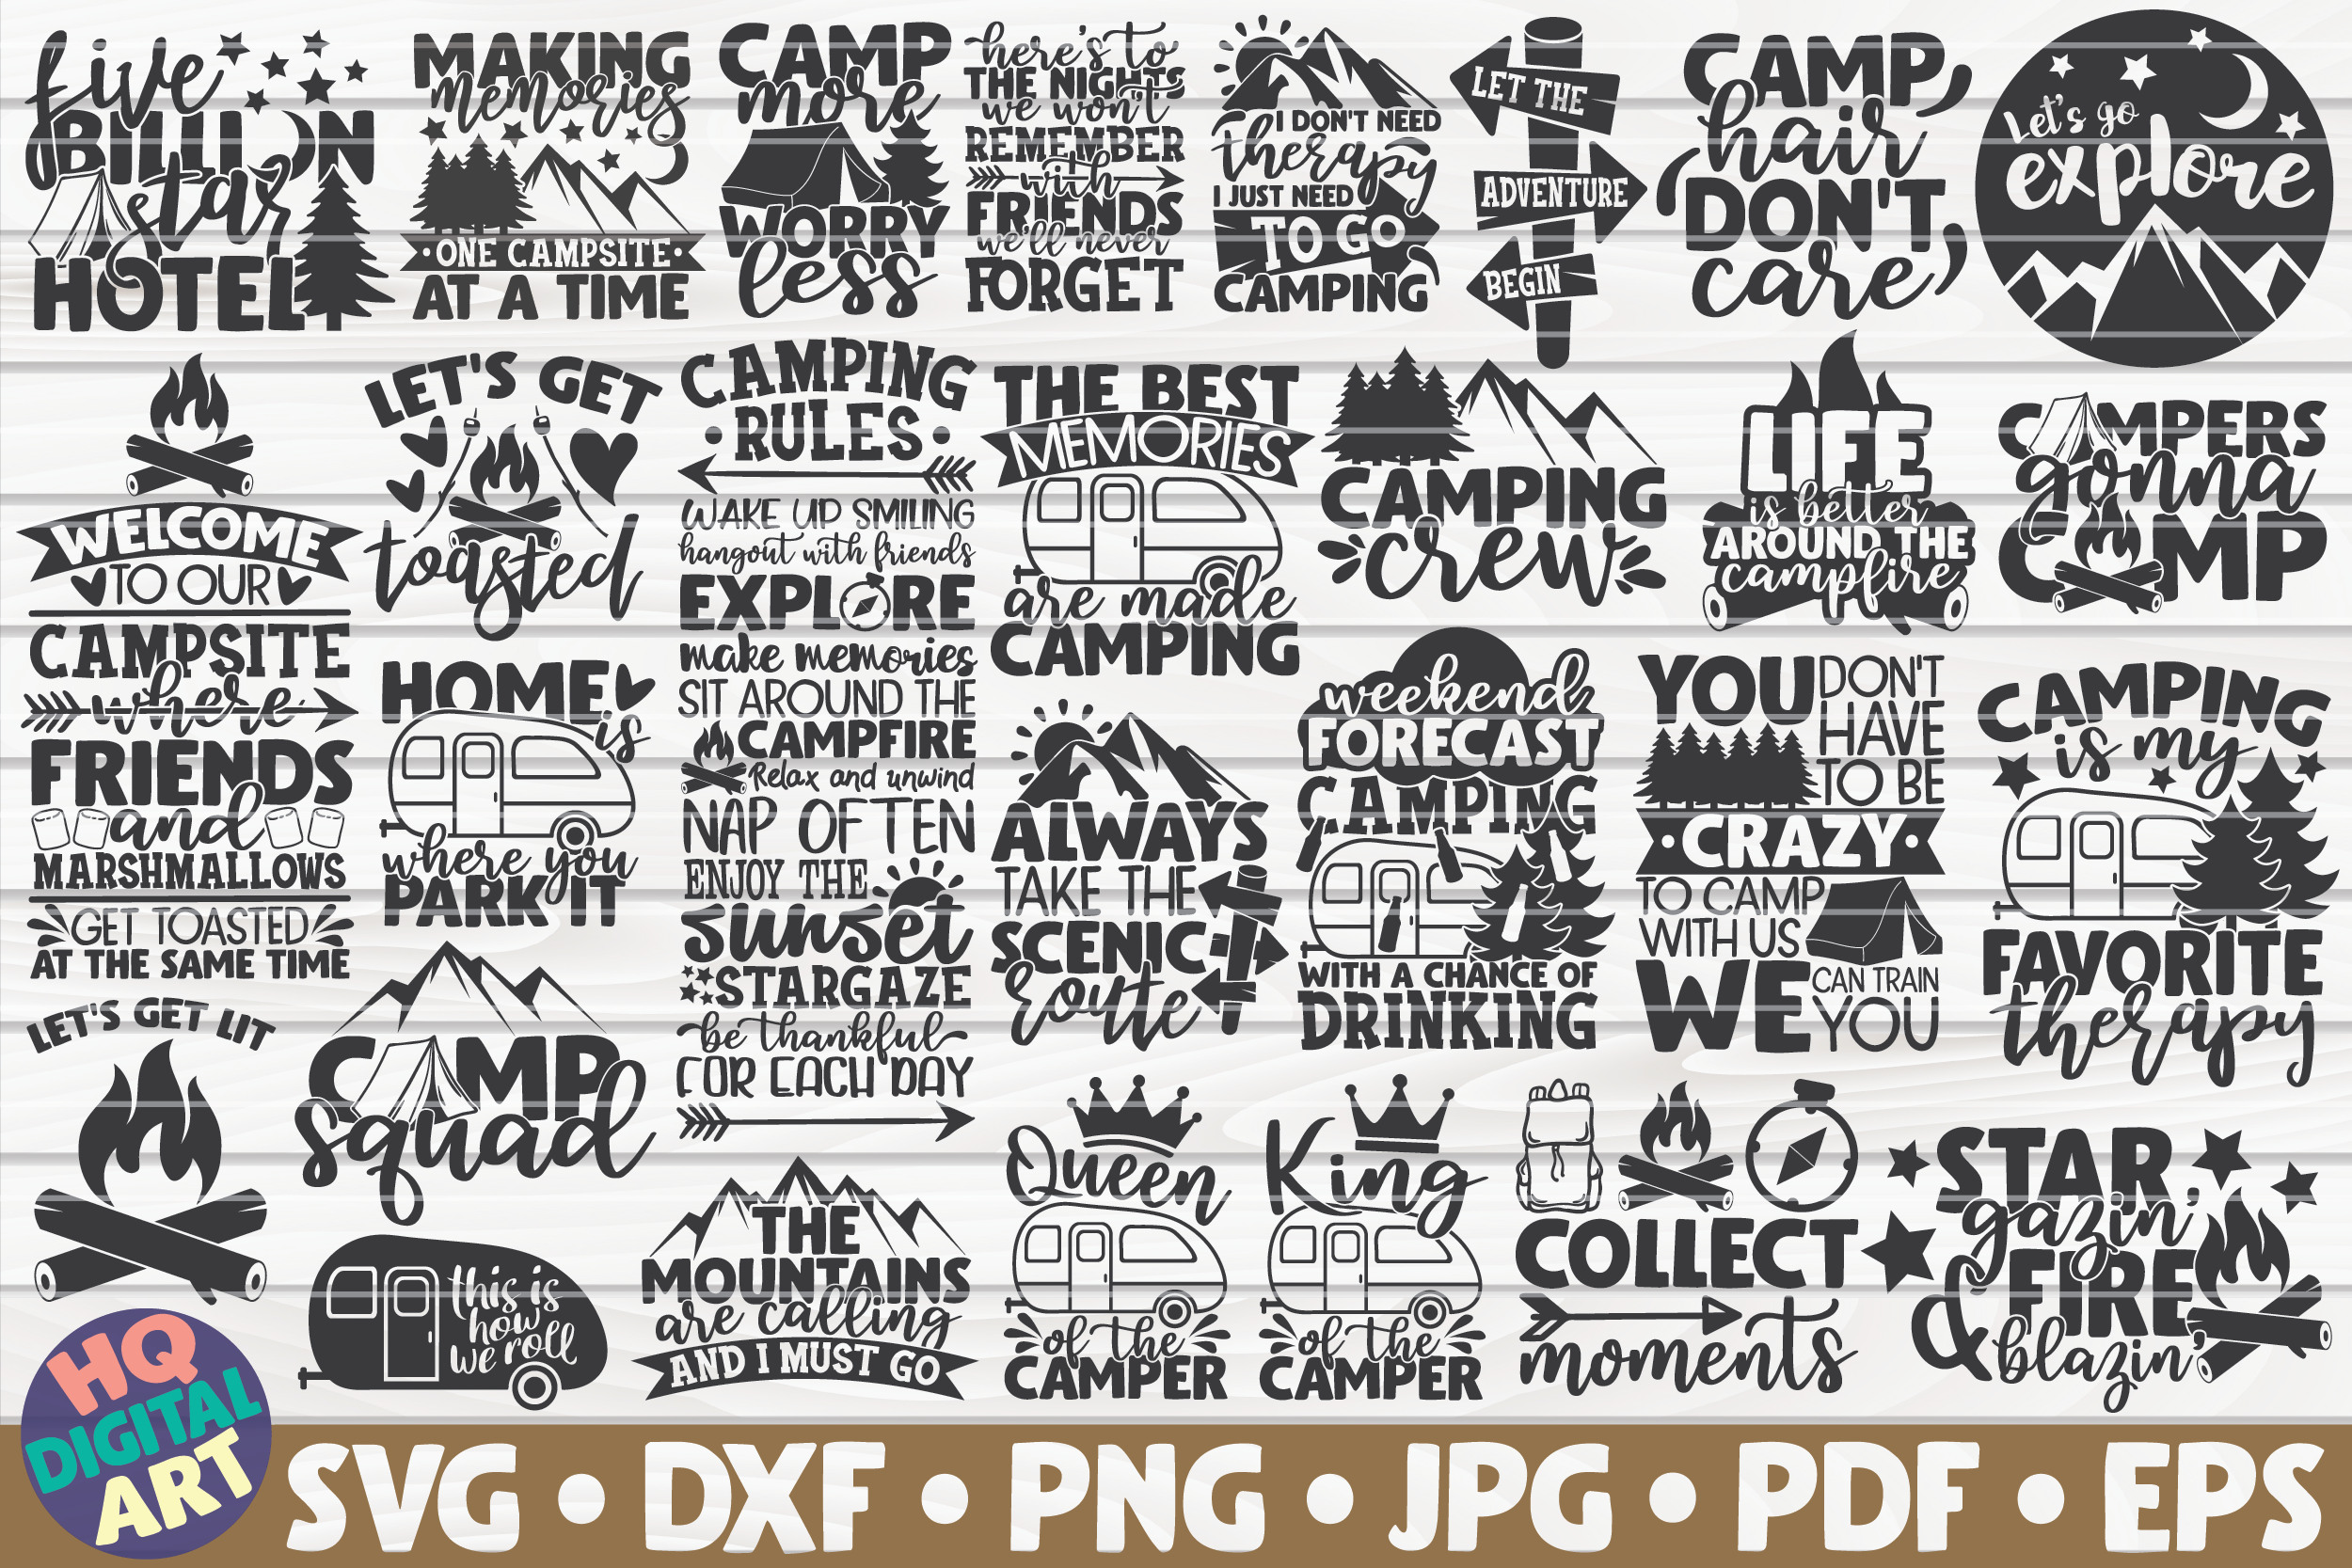 Download Camping Quotes Svg Bundle 28 Designs By Hqdigitalart Thehungryjpeg Com